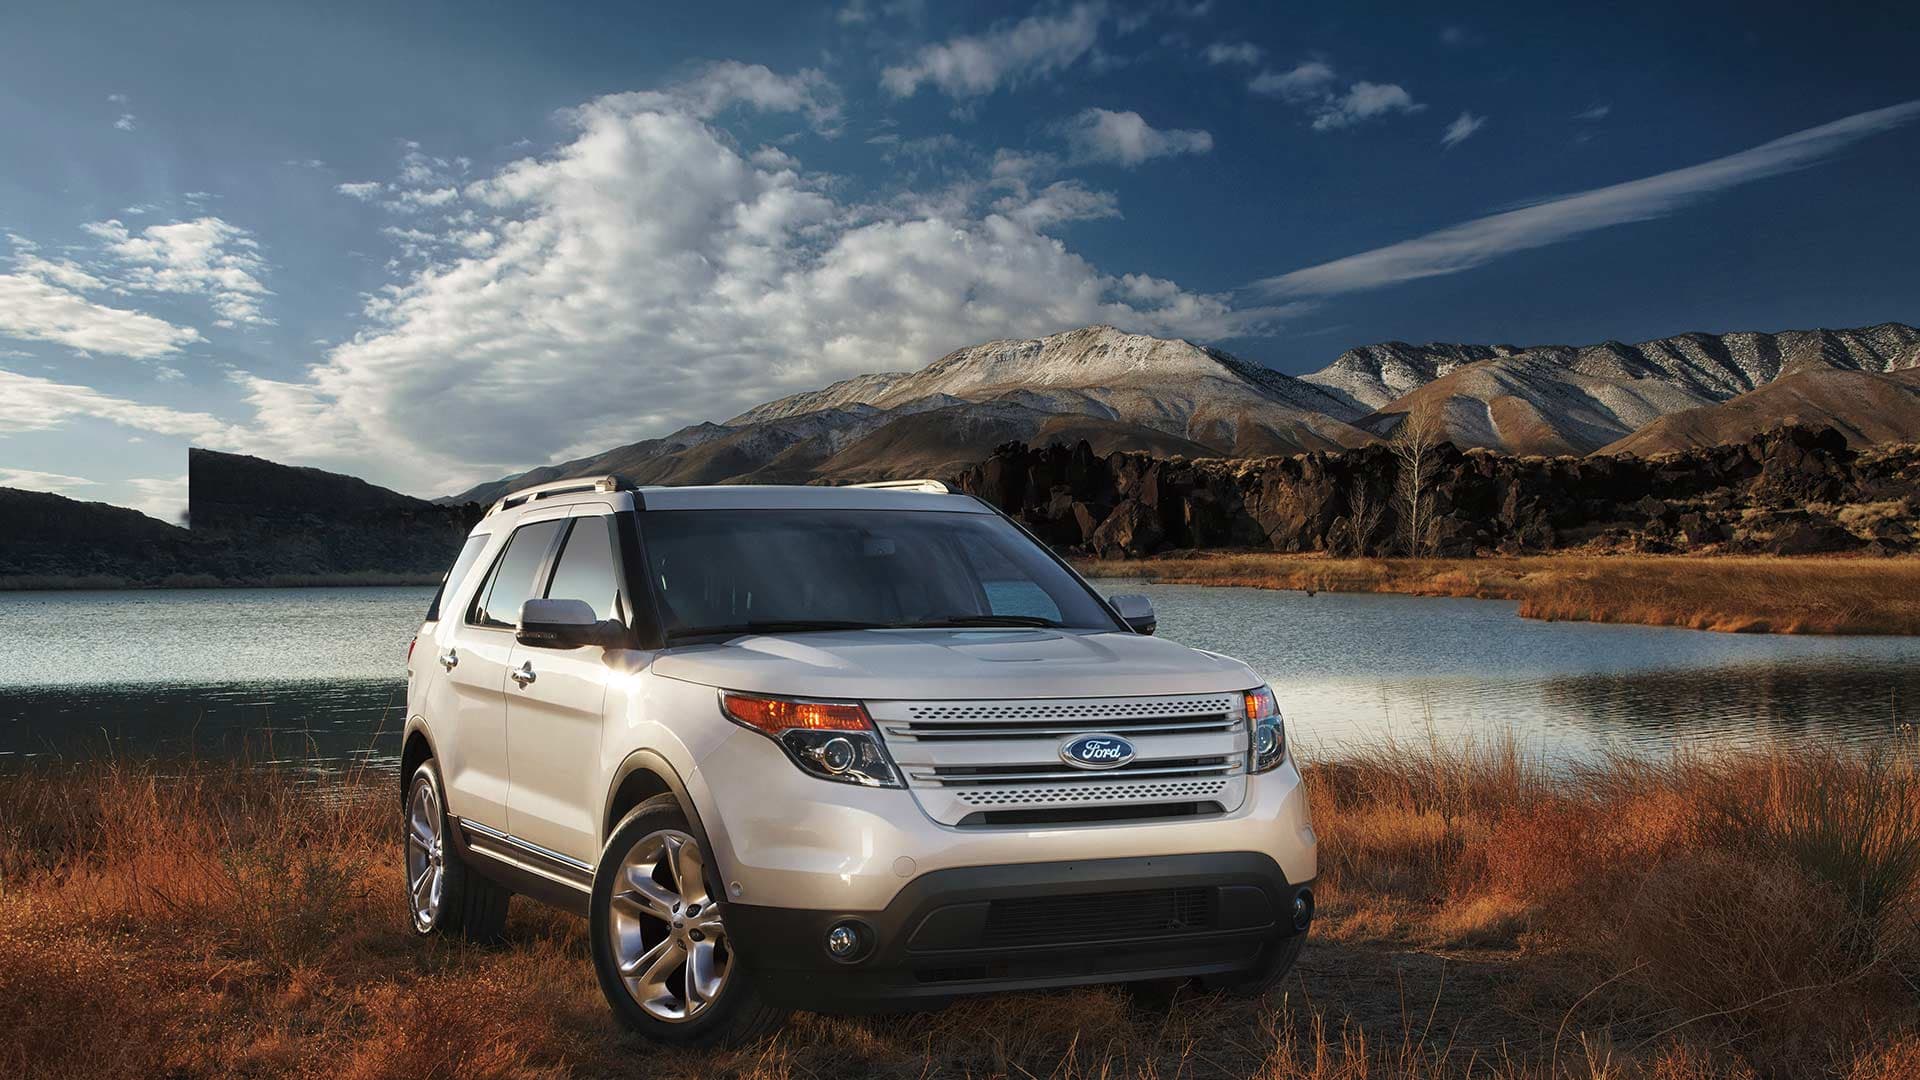 Ford Explorer Owners Still Complaining of Exhaust Odor in Cabin